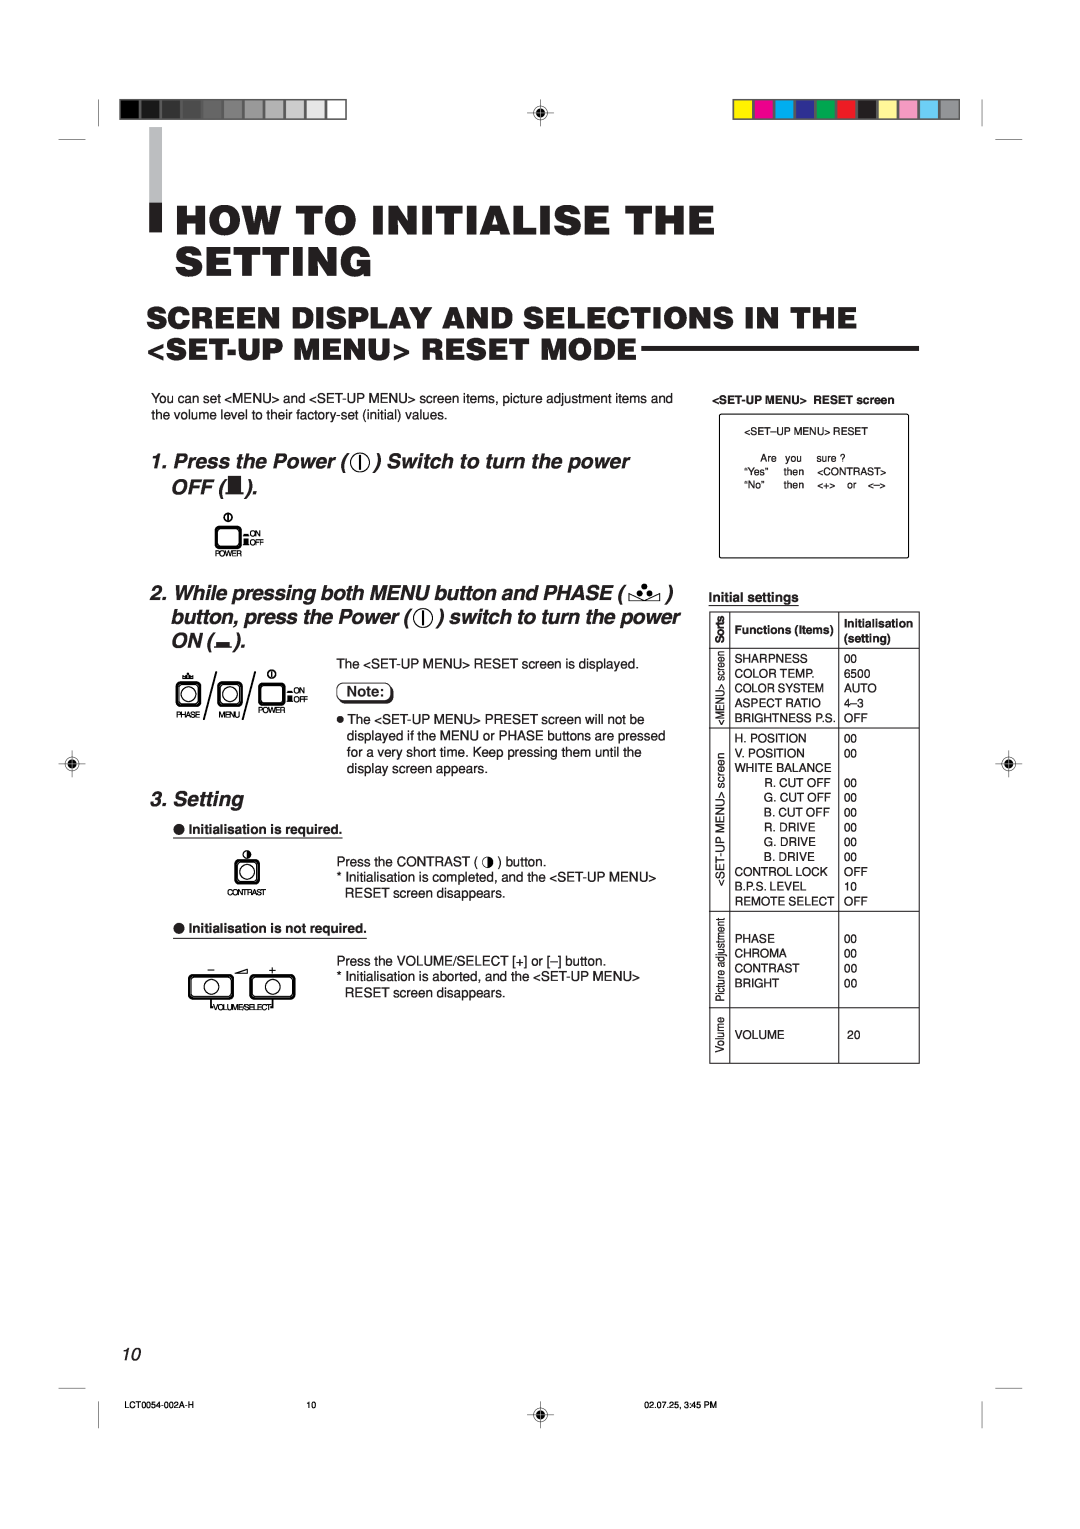 JVC TM-2100PN-K manual How To Initialise The Setting, Screen Display And Selections In The Set-Up Menu Reset Mode, setting 